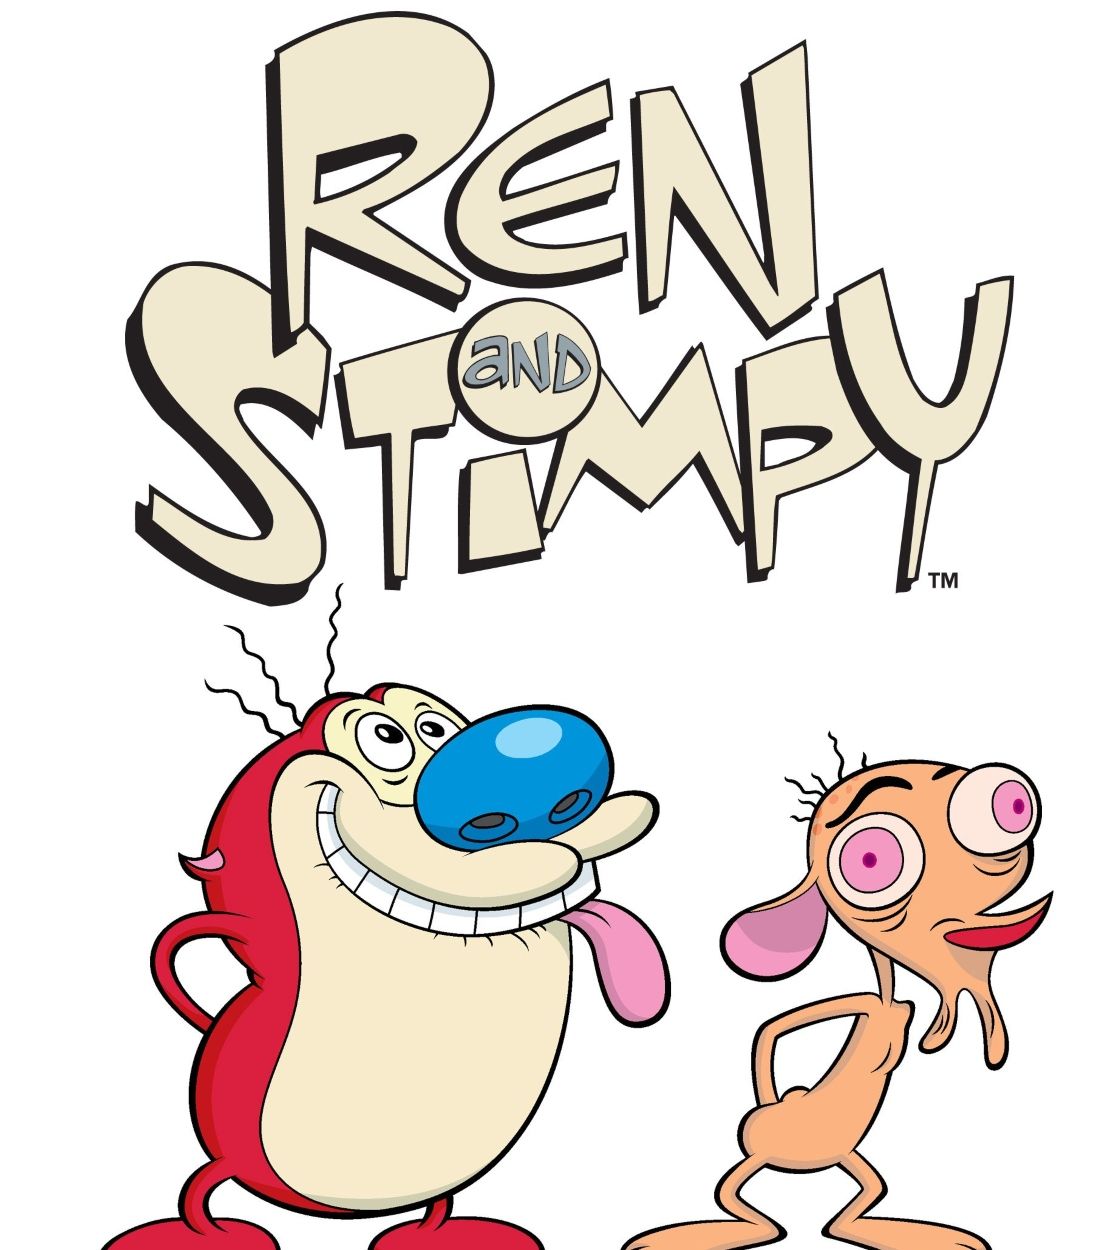 ren and stimpy poster TLDR vertical